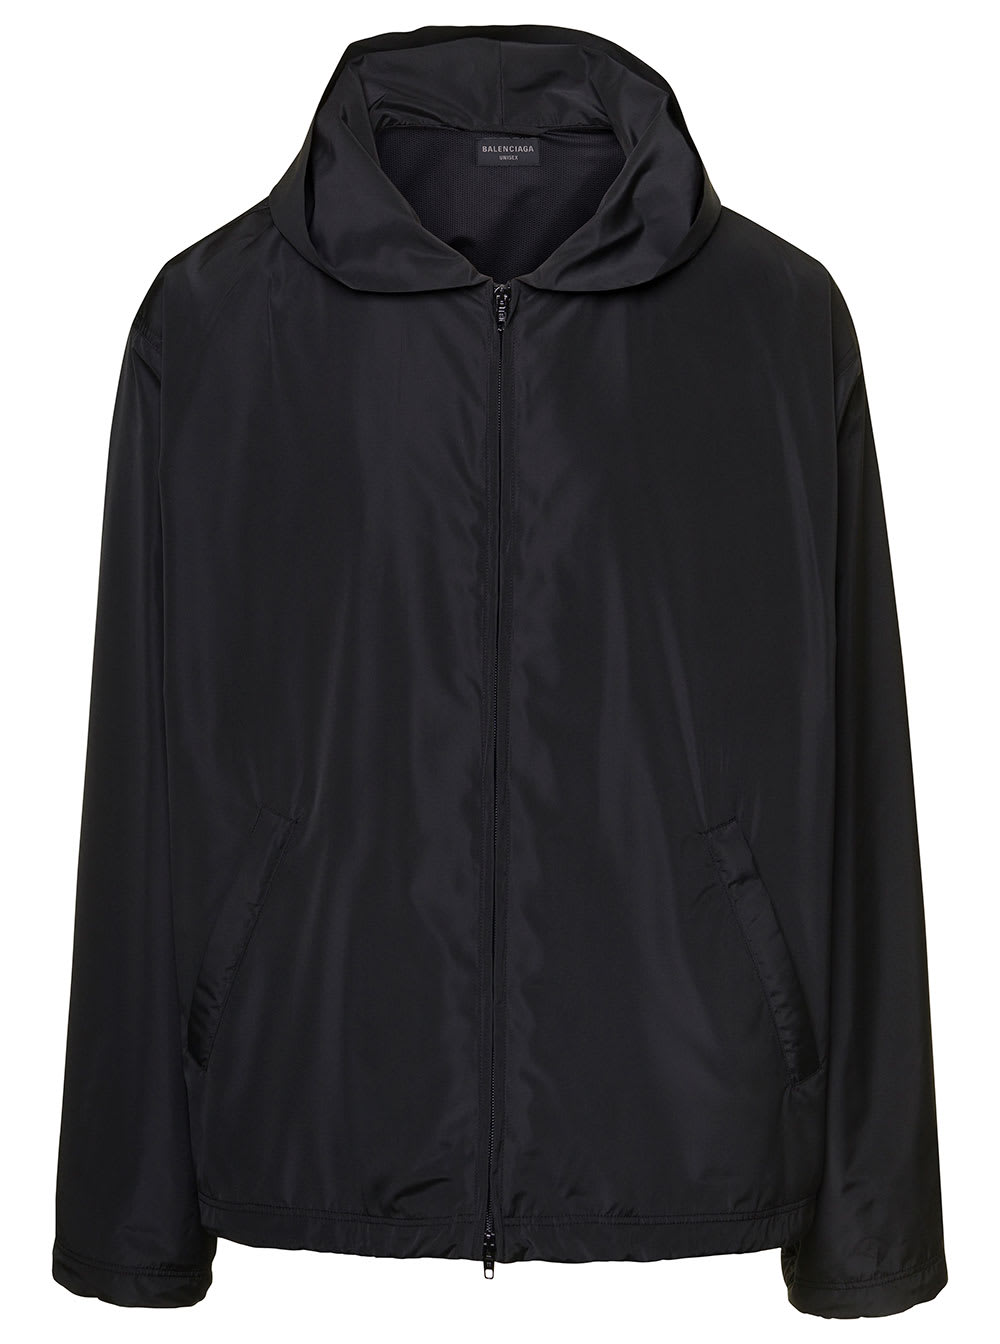 Balenciaga Black Hooded Windbreaker With Contrasting Logo Print At The Back In Polyester Blend Man